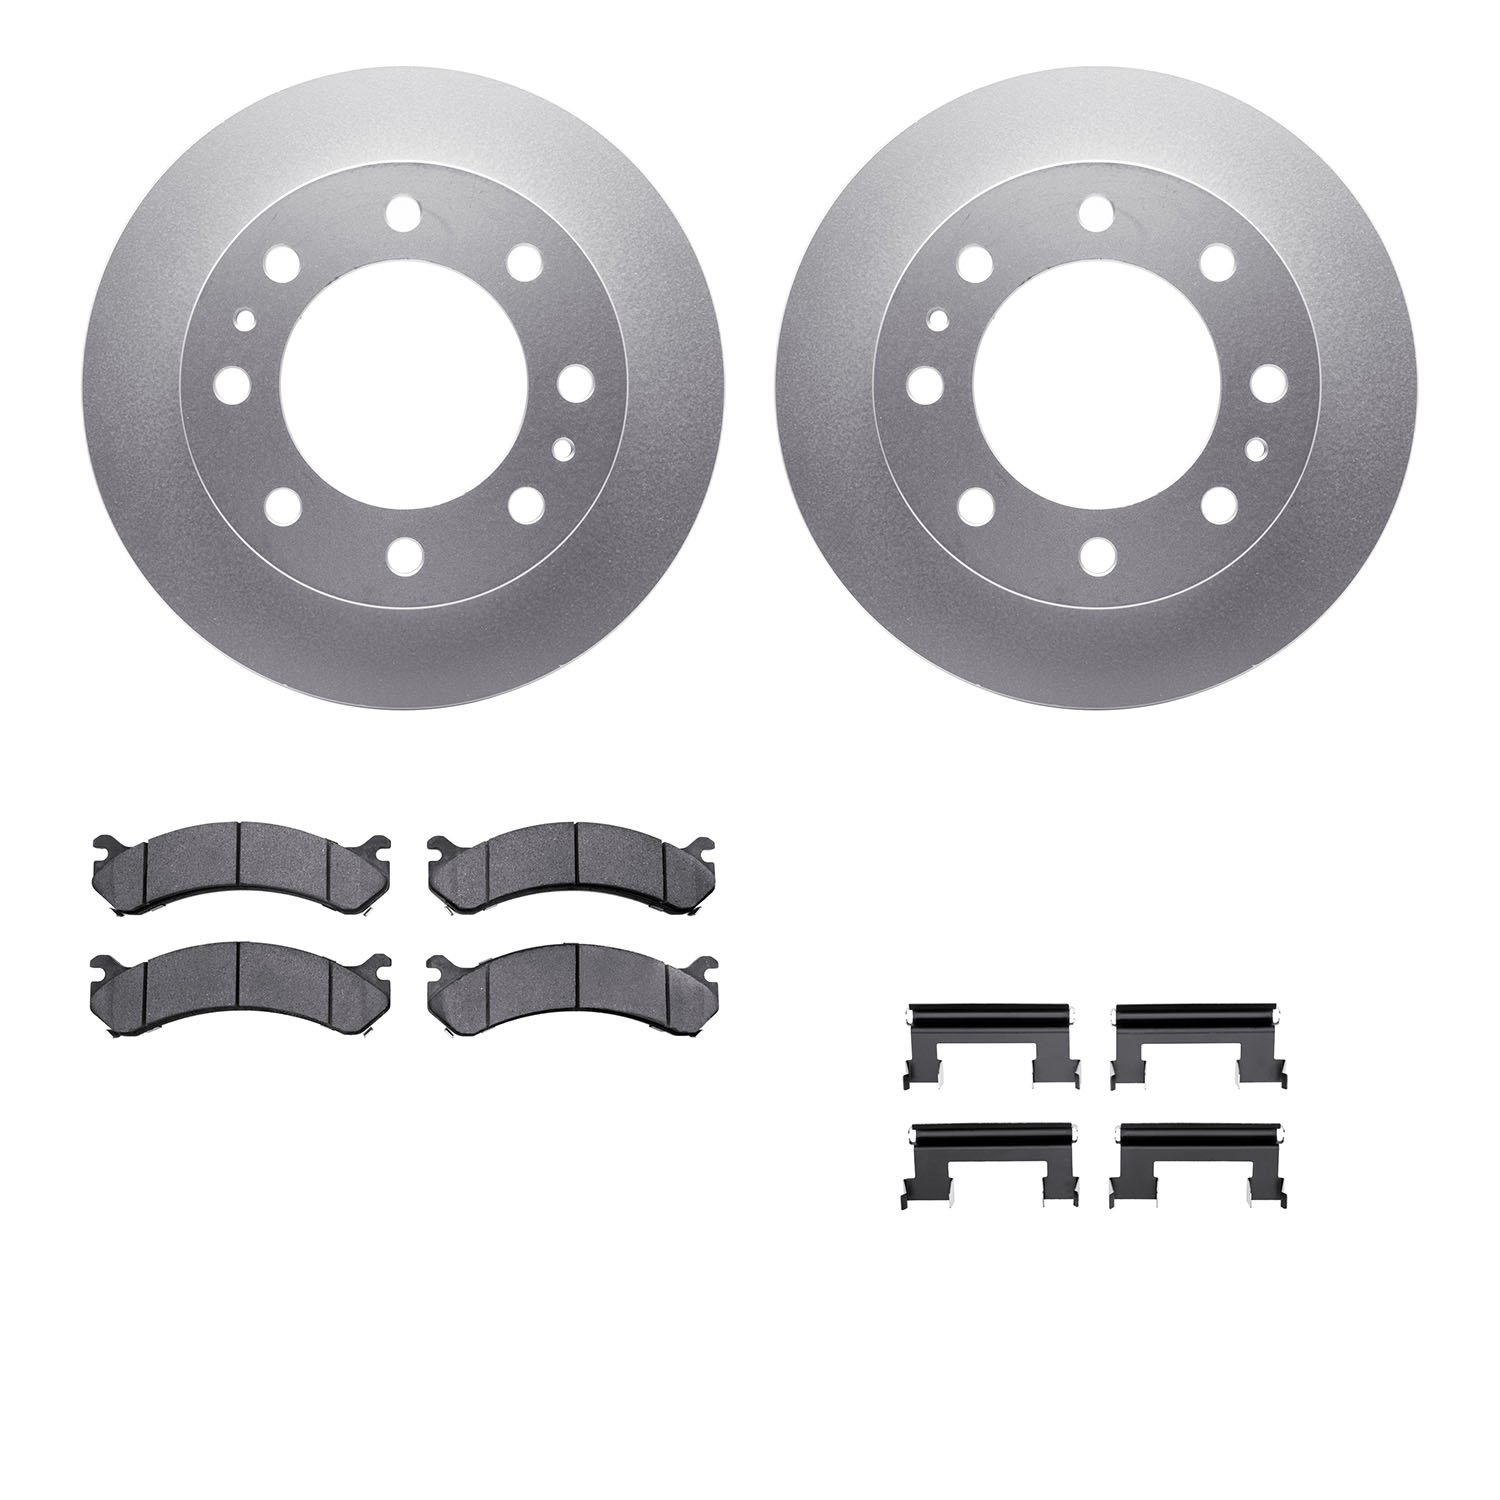 4412-48025 Geospec Brake Rotors with Ultimate-Duty Brake Pads & Hardware, 2001-2020 GM, Position: Front